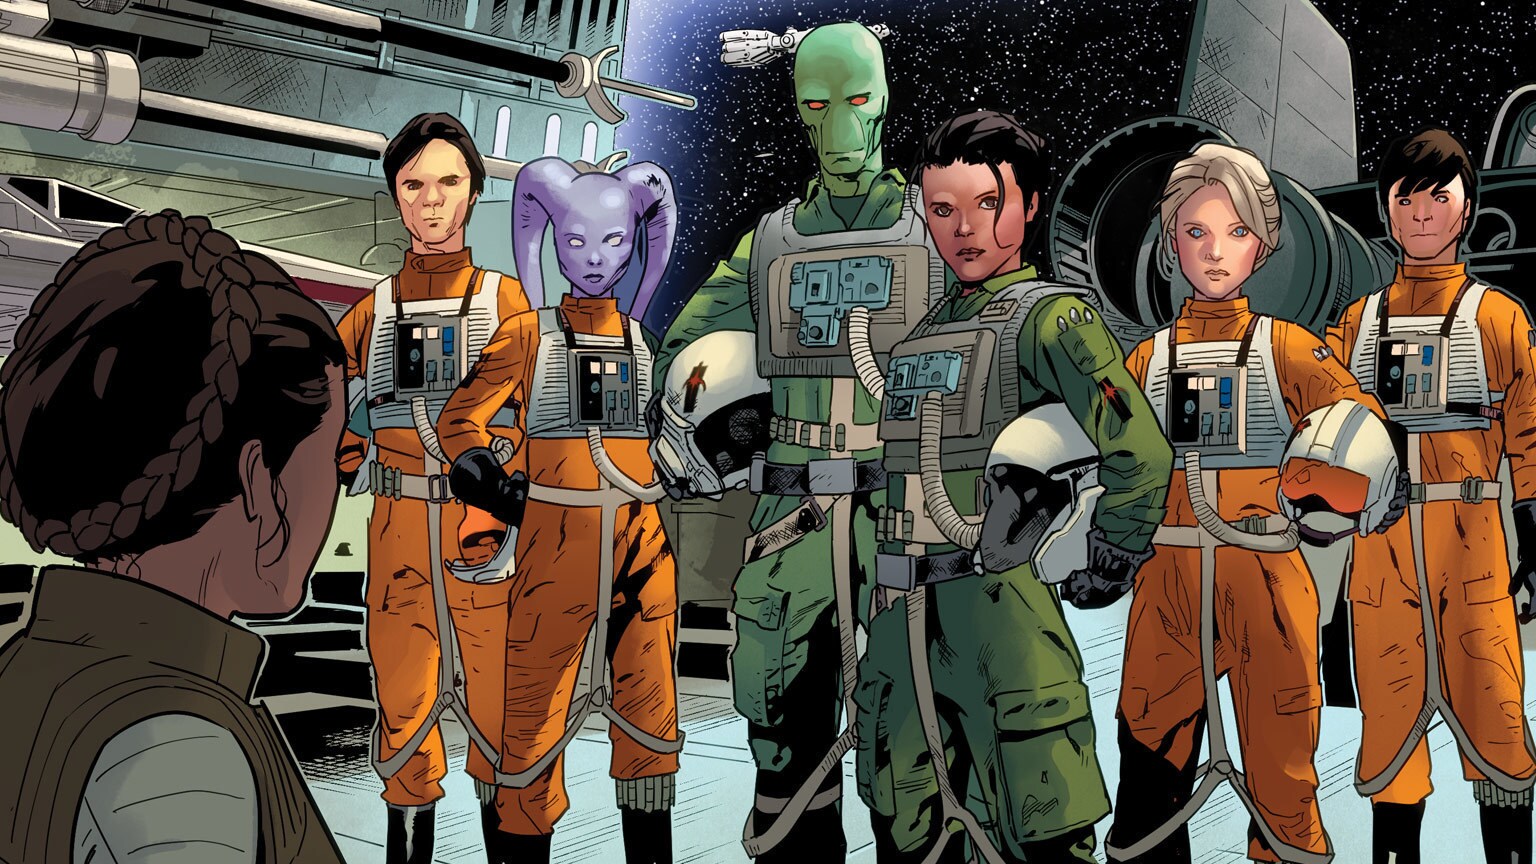 Starlight Squadron Blasts Off in Marvel’s Star Wars #10 - Exclusive Preview